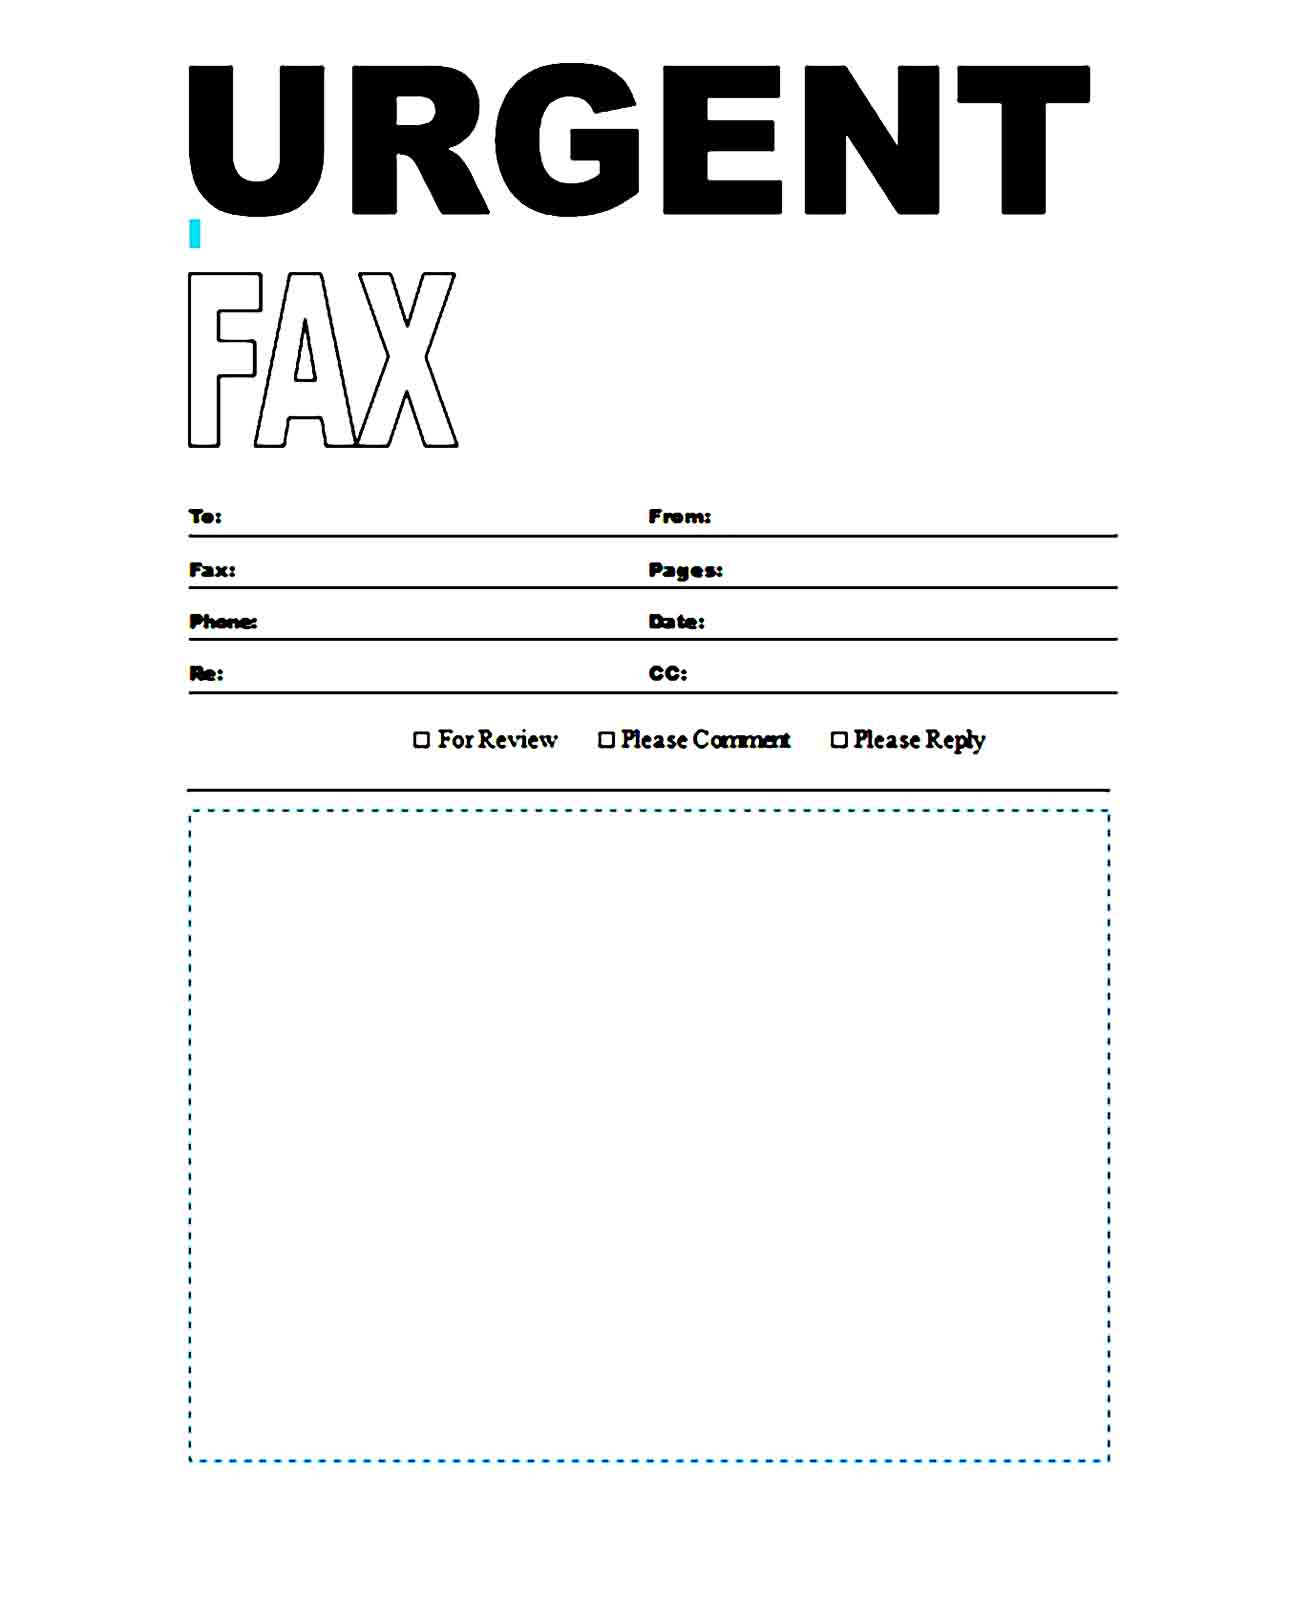 Fax Cover Sheet Template 08